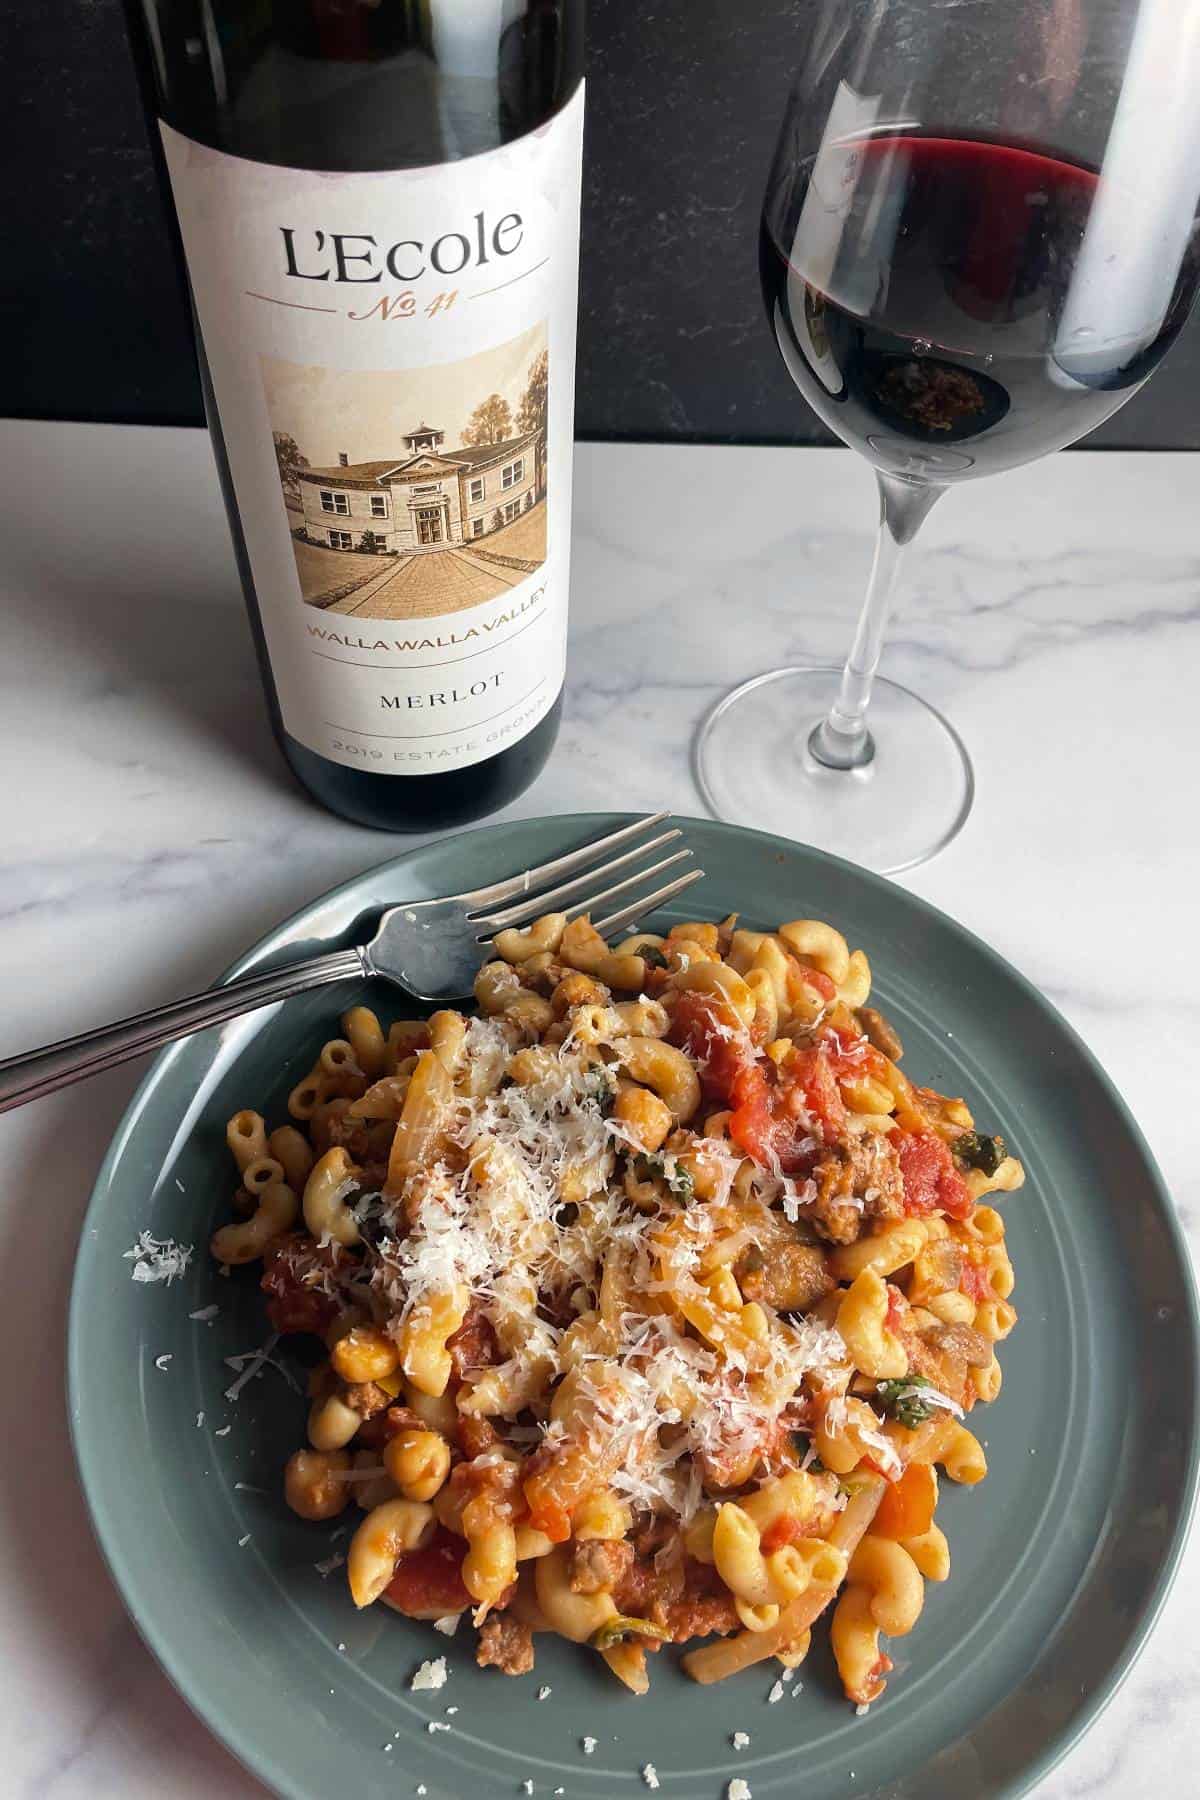 Elbow macaroni tossed with a ground beef and tomato sauce, served on a turquoise plate with a Merlot red wine.